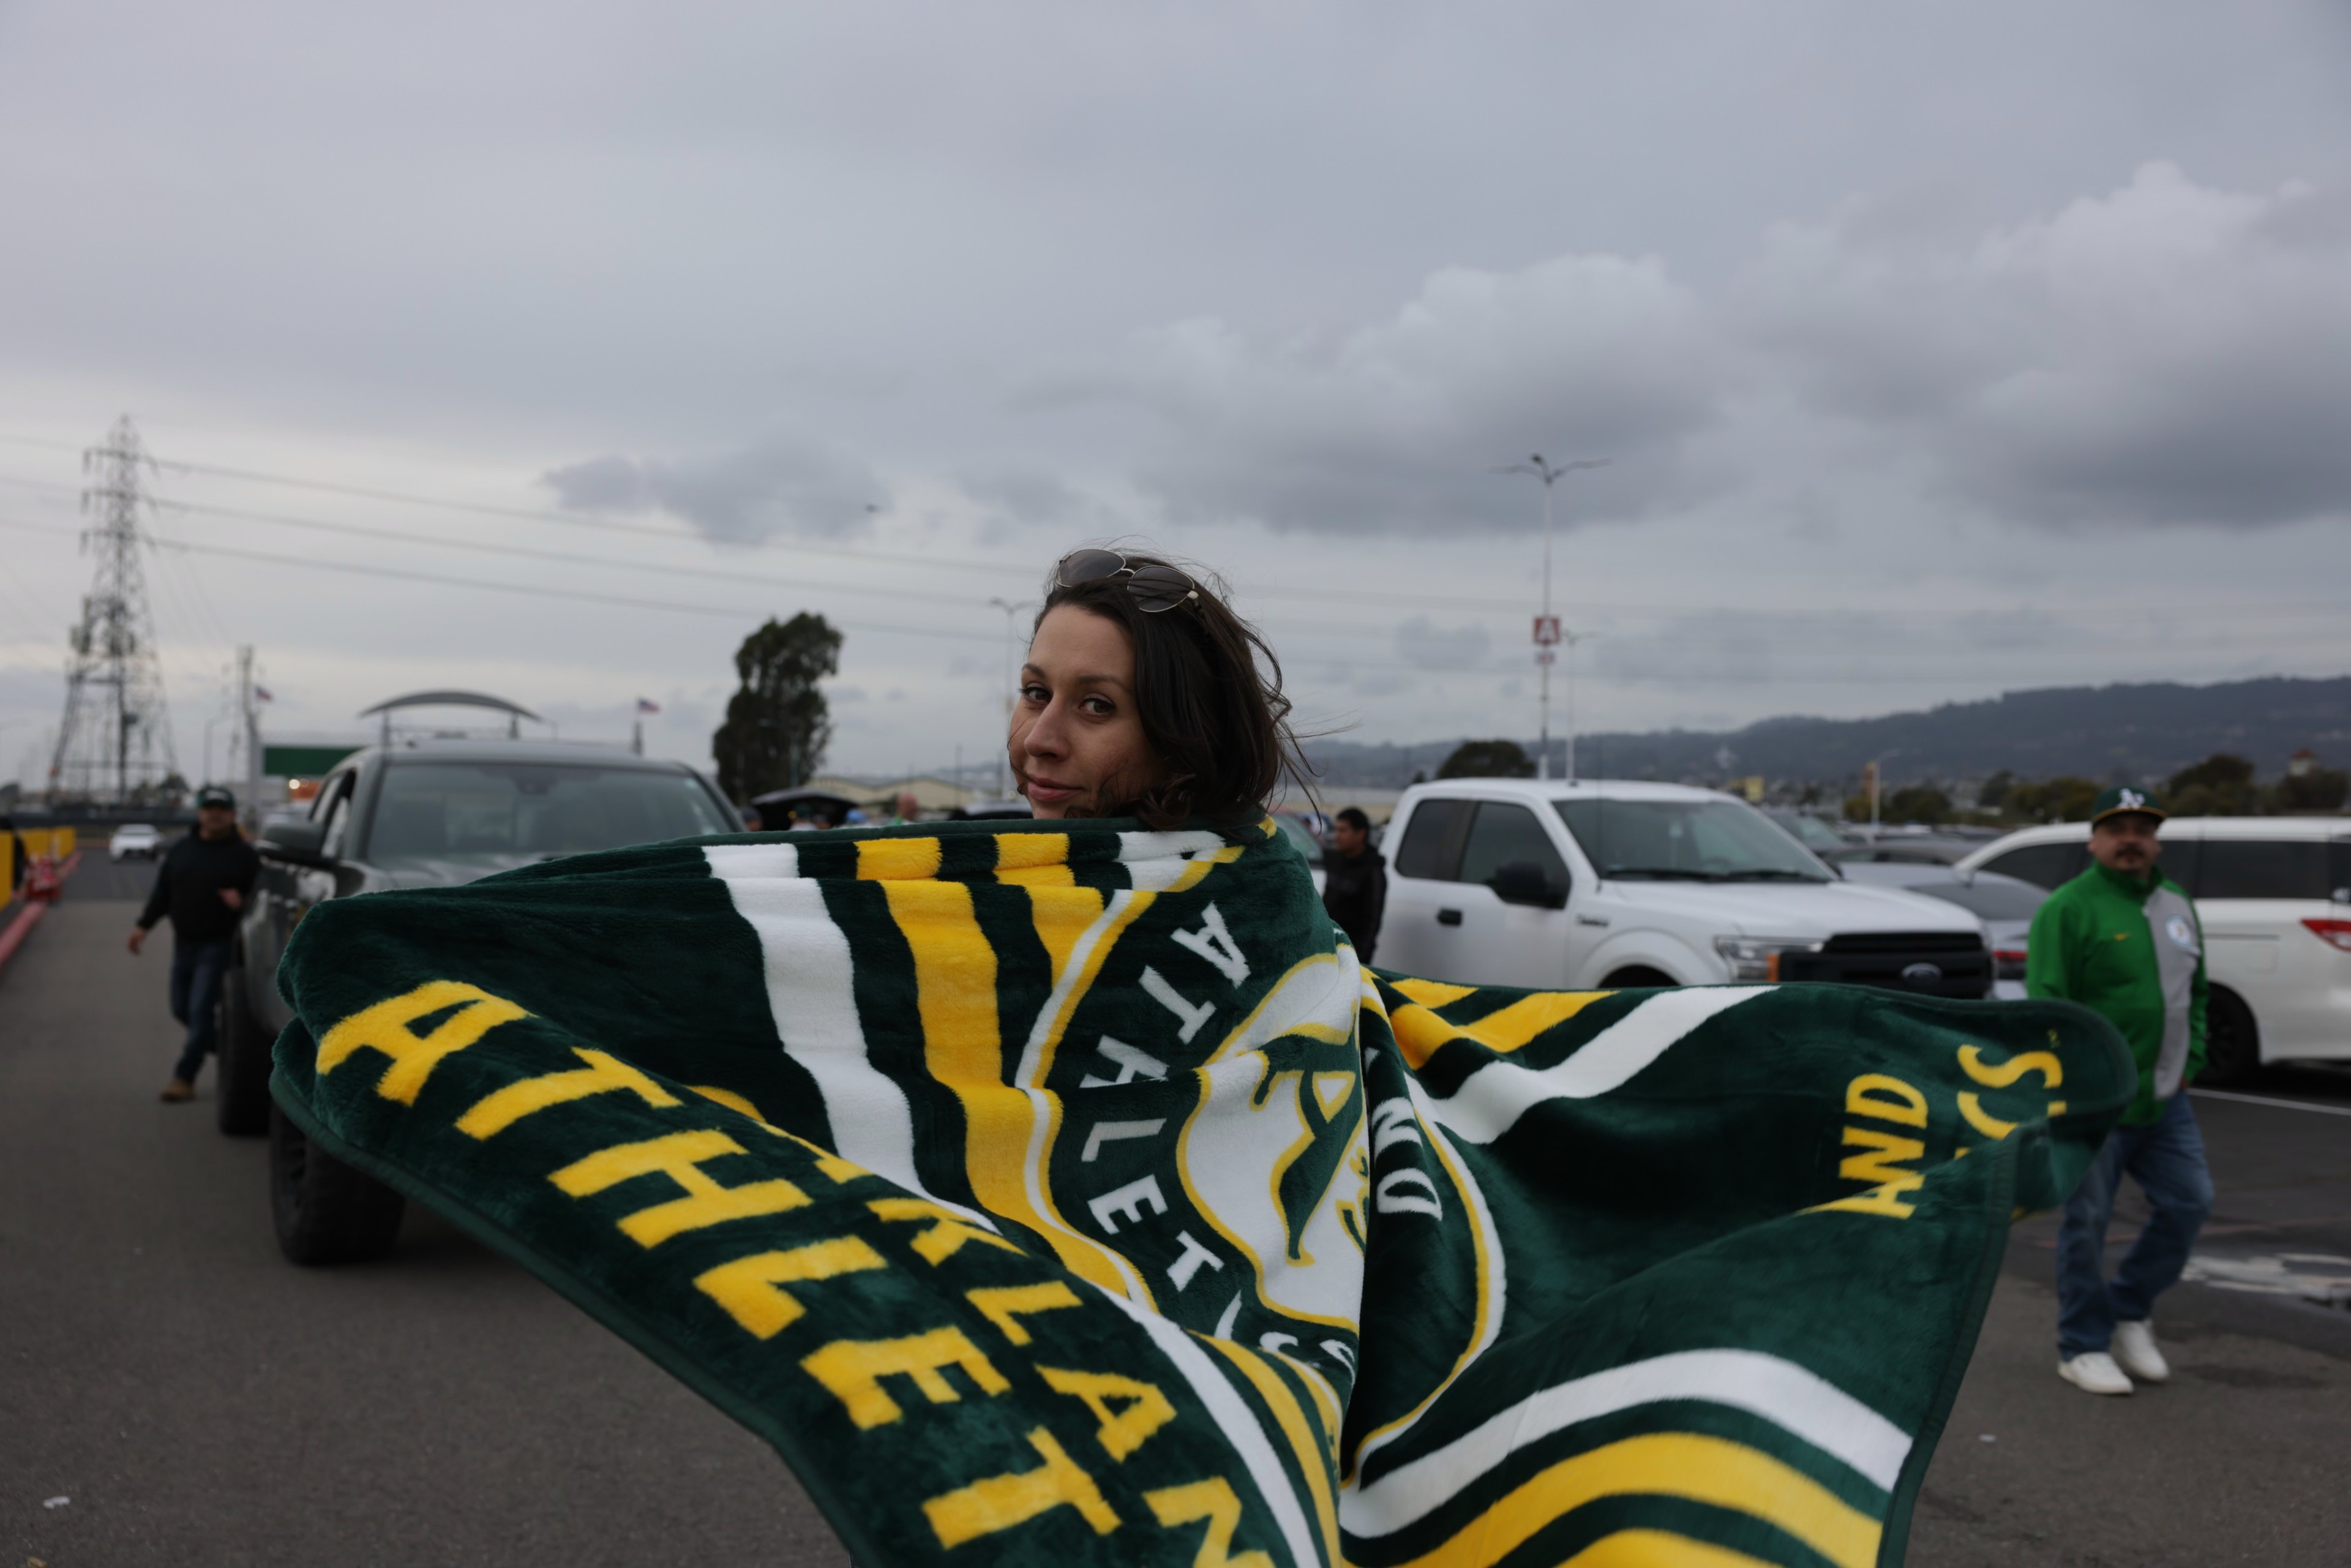 A person holds a green and yellow scarf with the word &quot;ATHLETICS&quot; while standing in a parking lot.